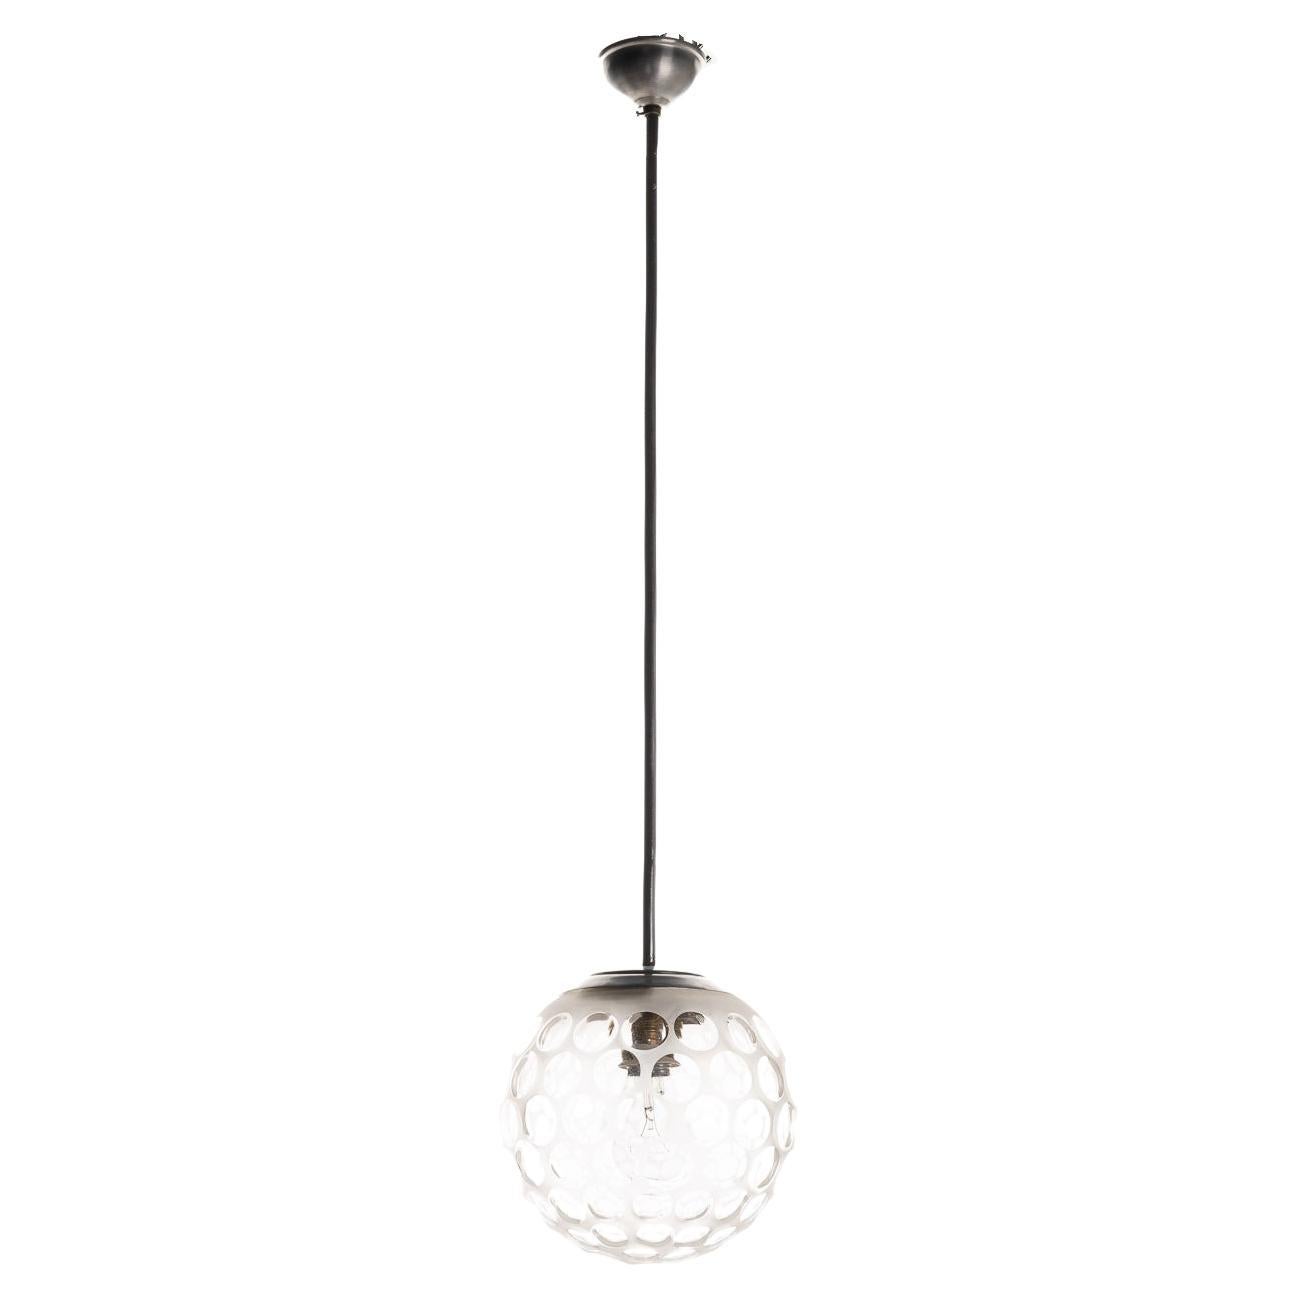 1940's Murano Glass and Metal Pendant Attributed to Lenti by Carlo scarpa